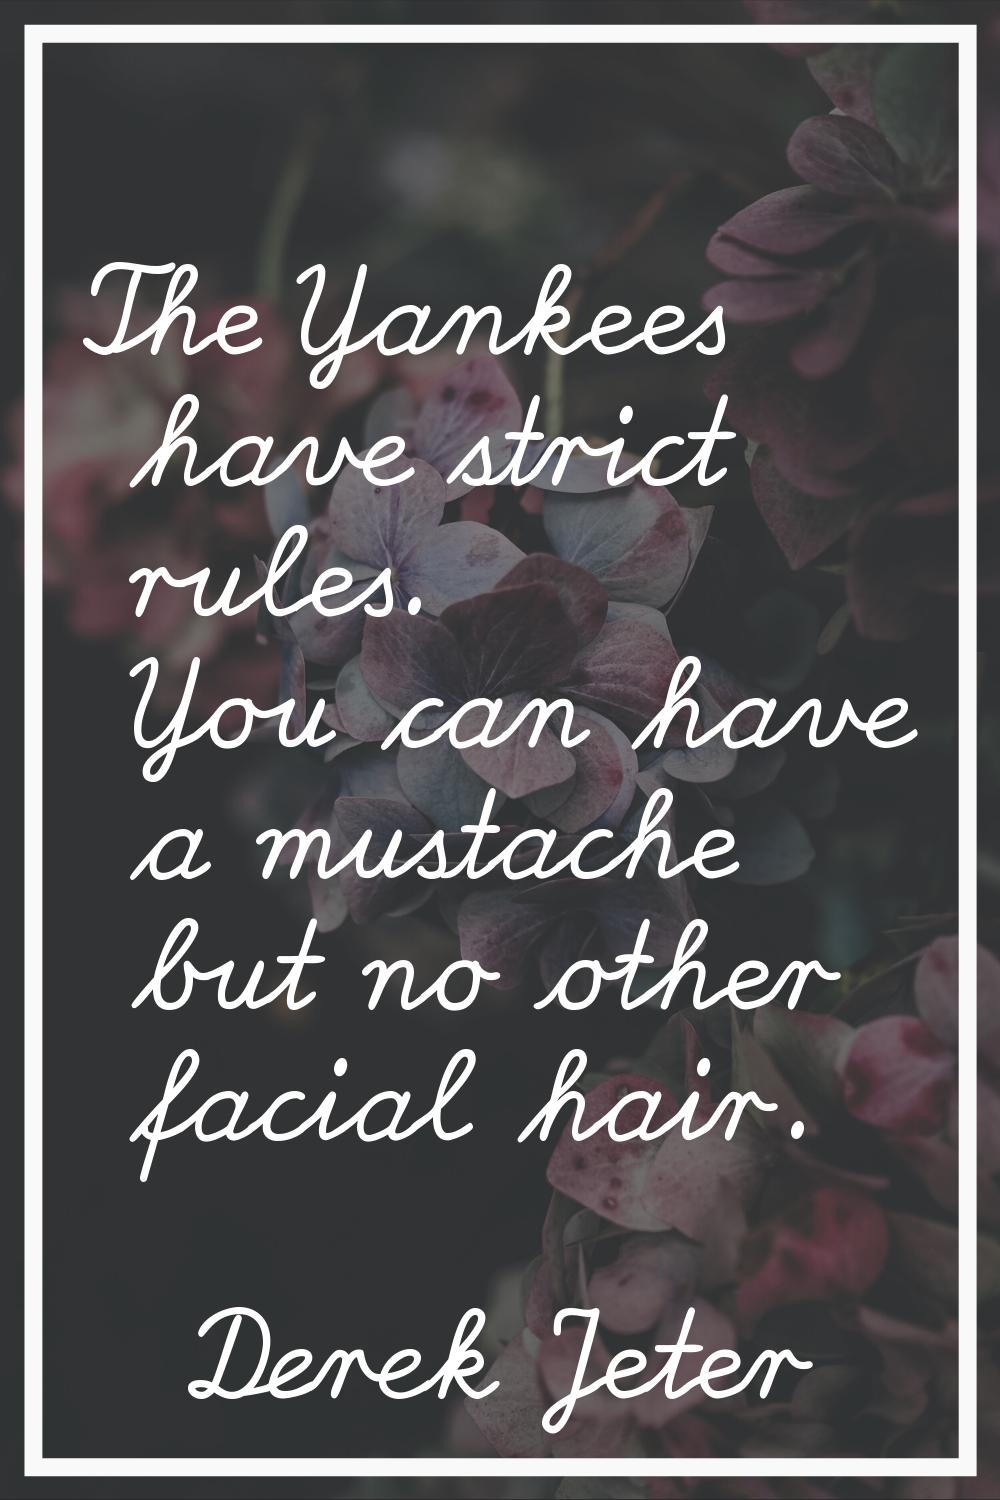 The Yankees have strict rules. You can have a mustache but no other facial hair.